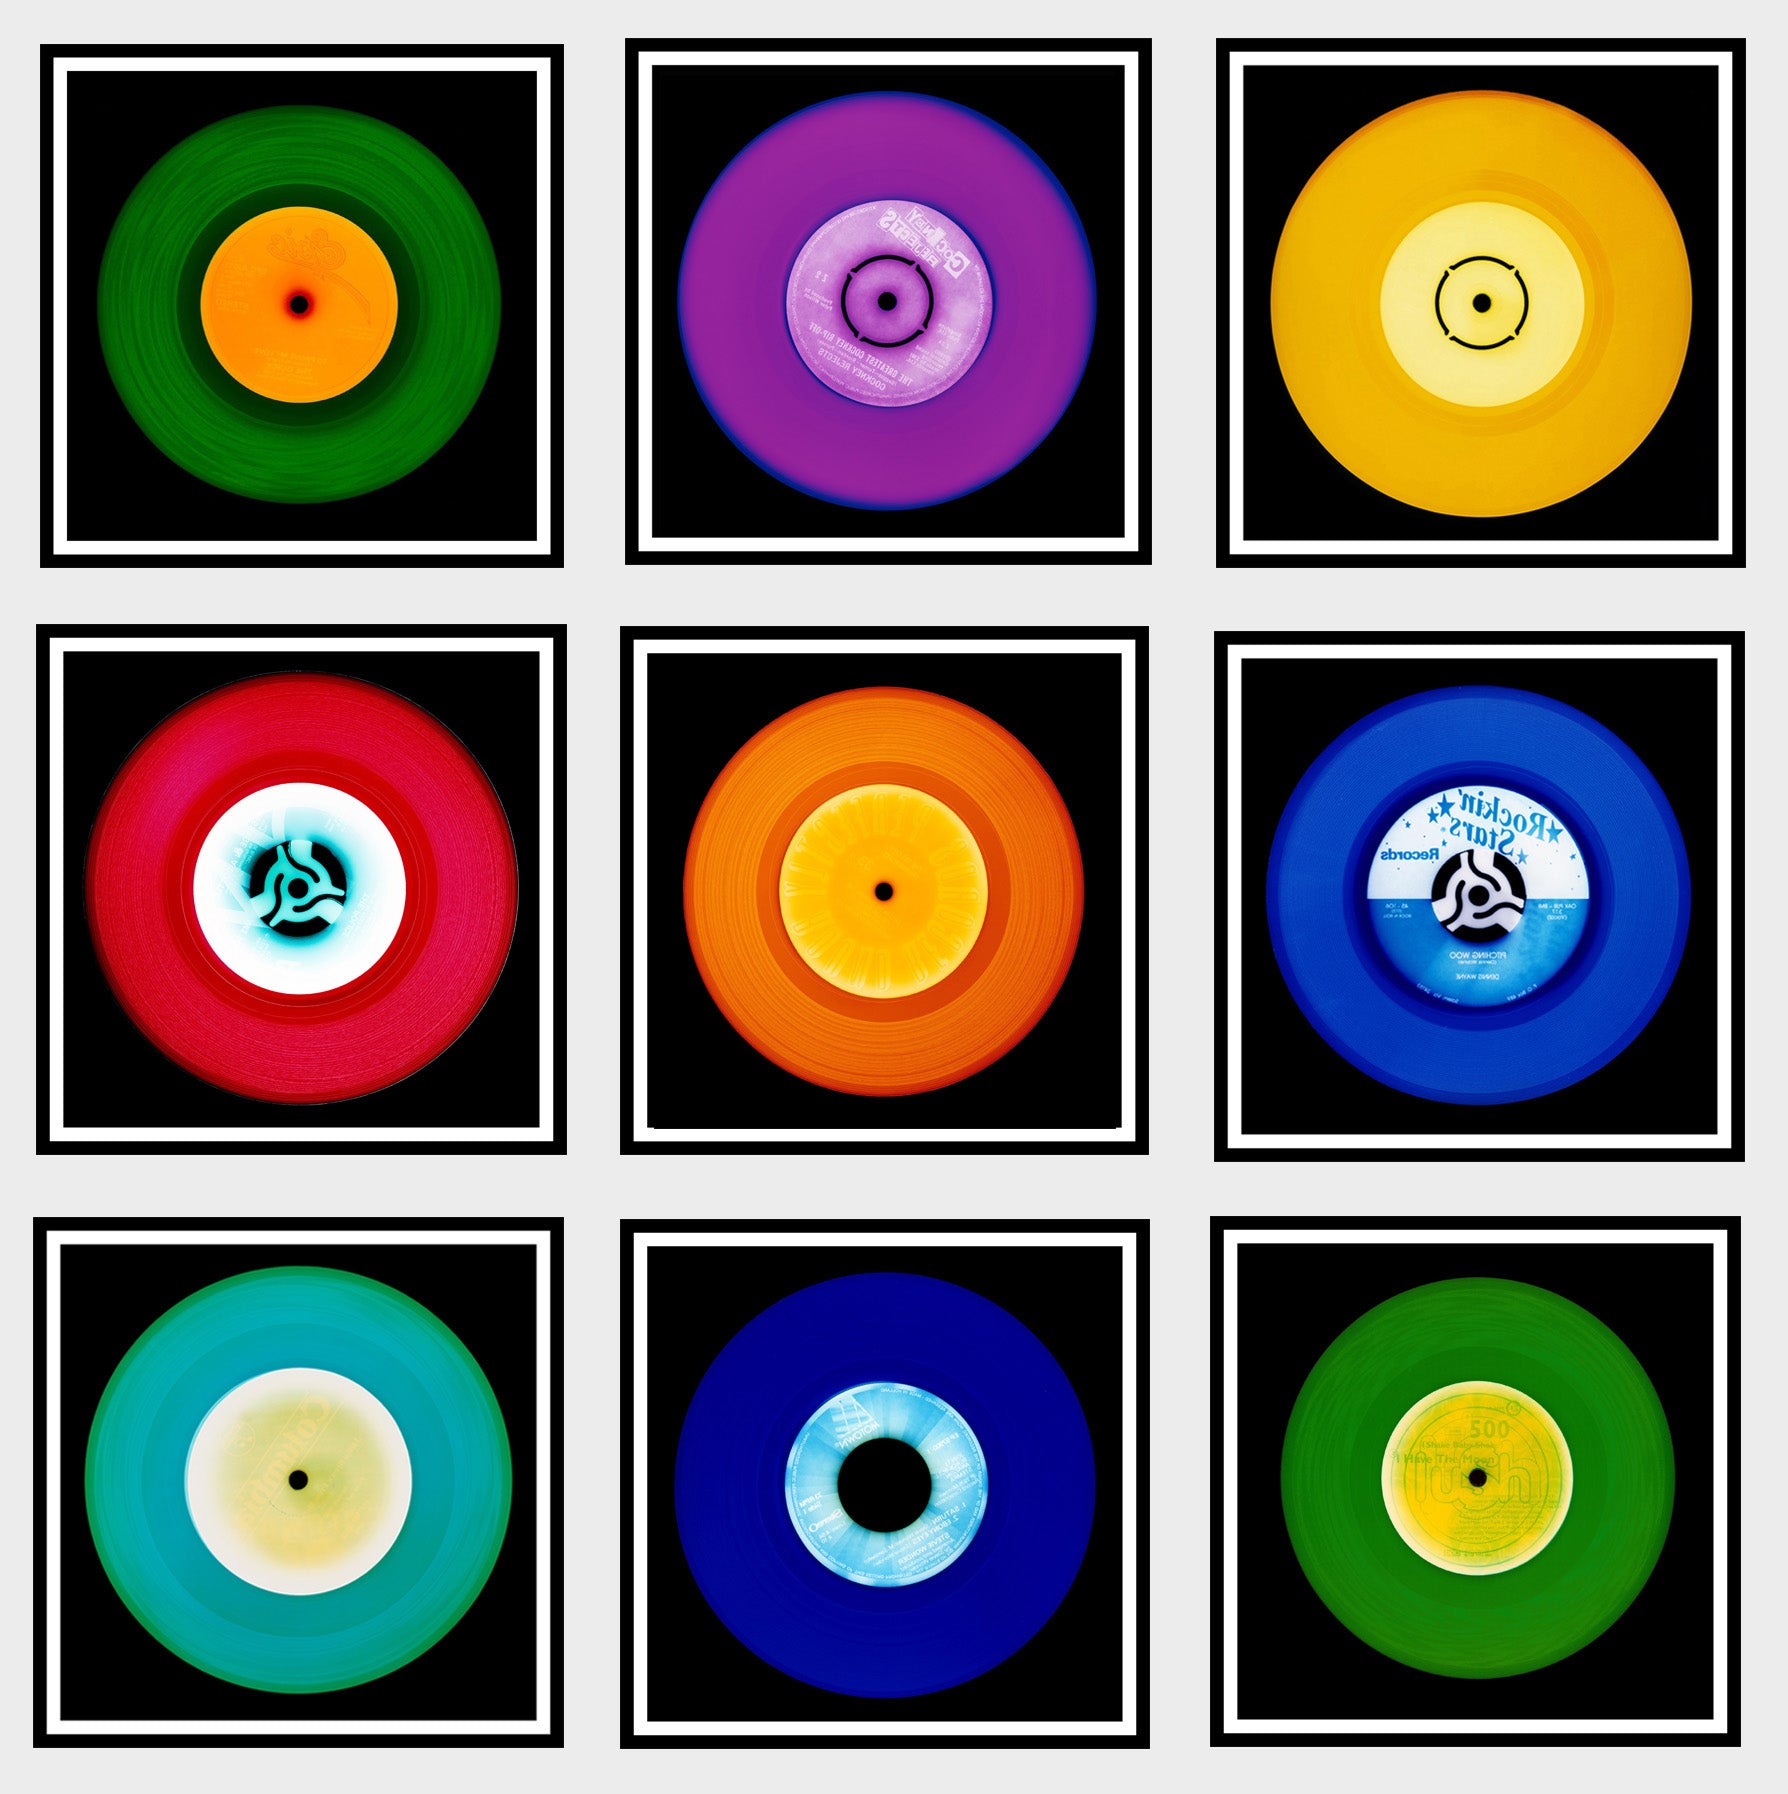 Photographs by Natasha Heidler and Richard Heeps.  A set of 9 vinyls records in a variety of colours in a 3 x 3 configuration.